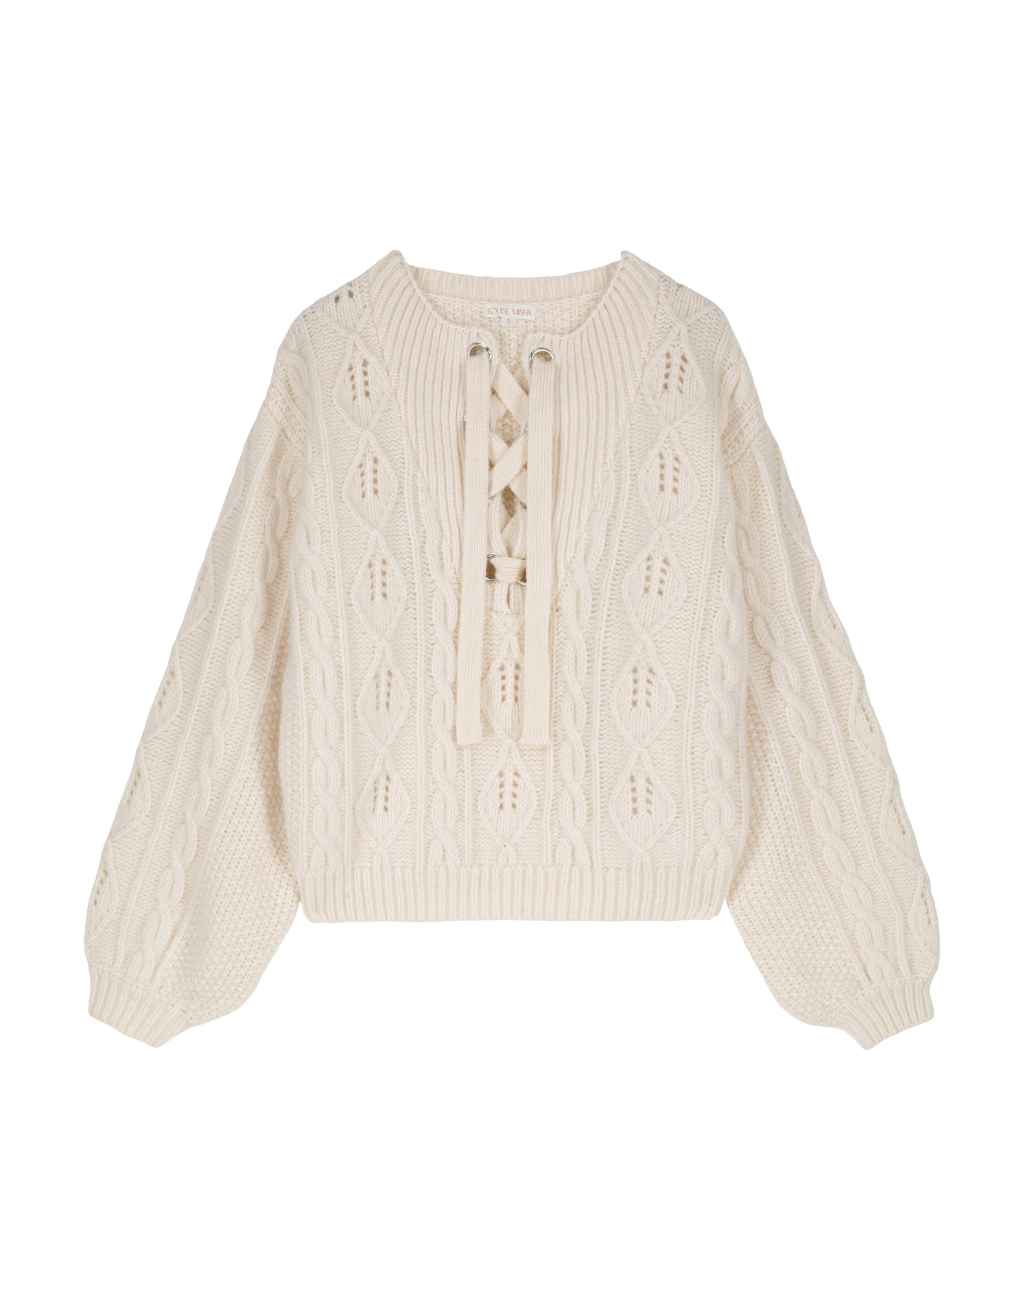 Cozy Beja Sweater with Lace-Up Collar - Visit Nifty Louise Misha 